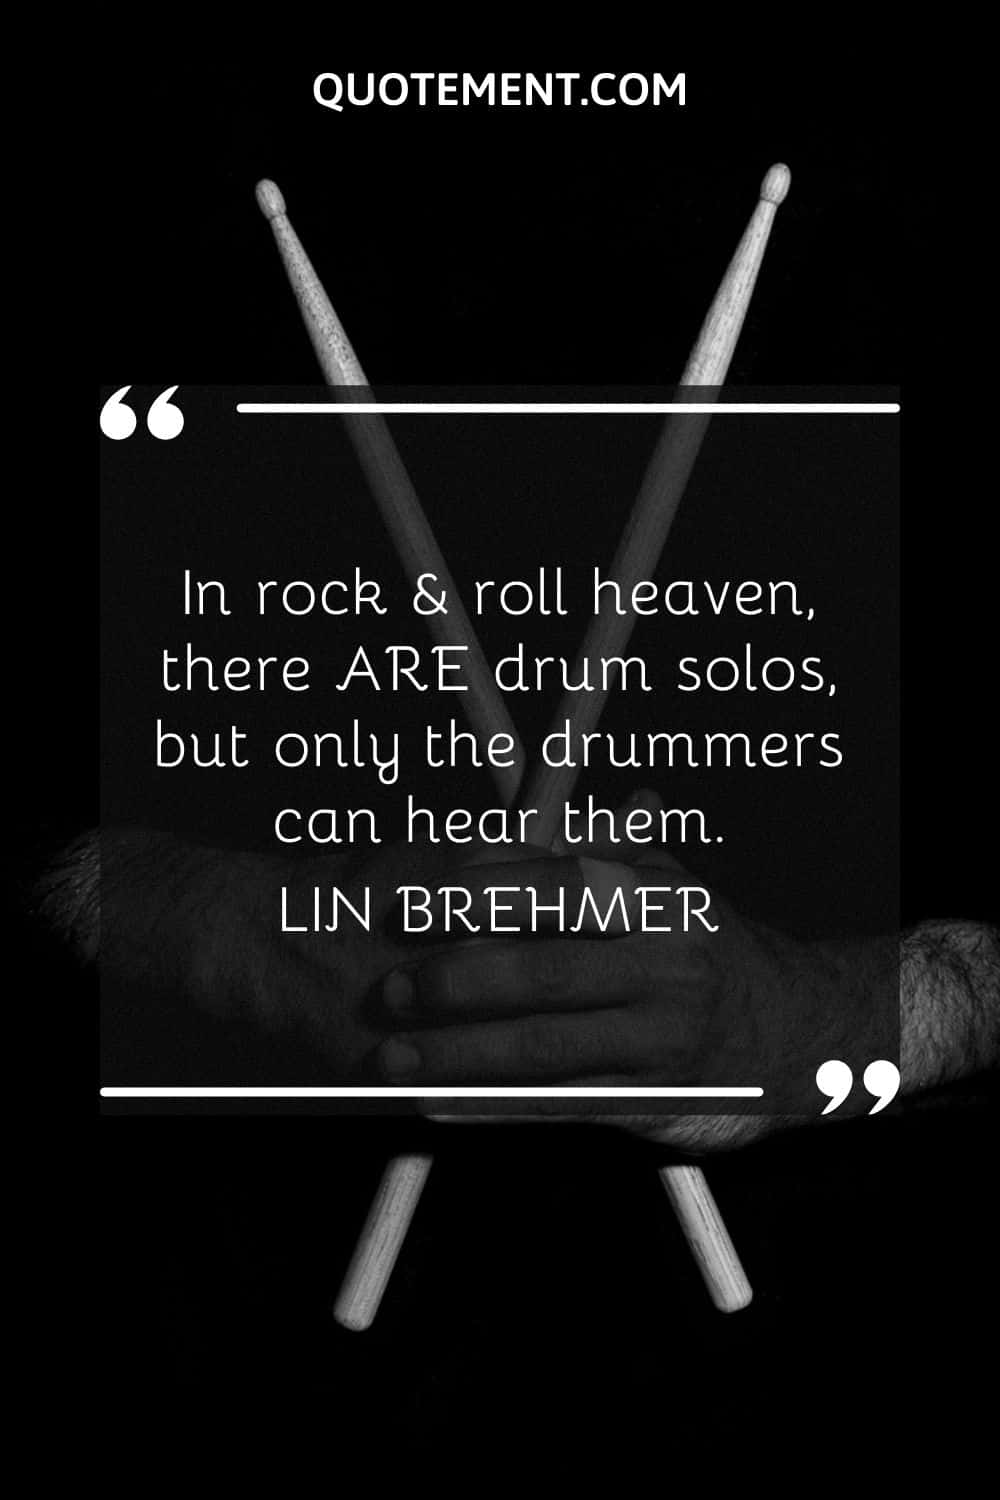 In rock & roll heaven, there ARE drum solos, but only the drummers can hear them